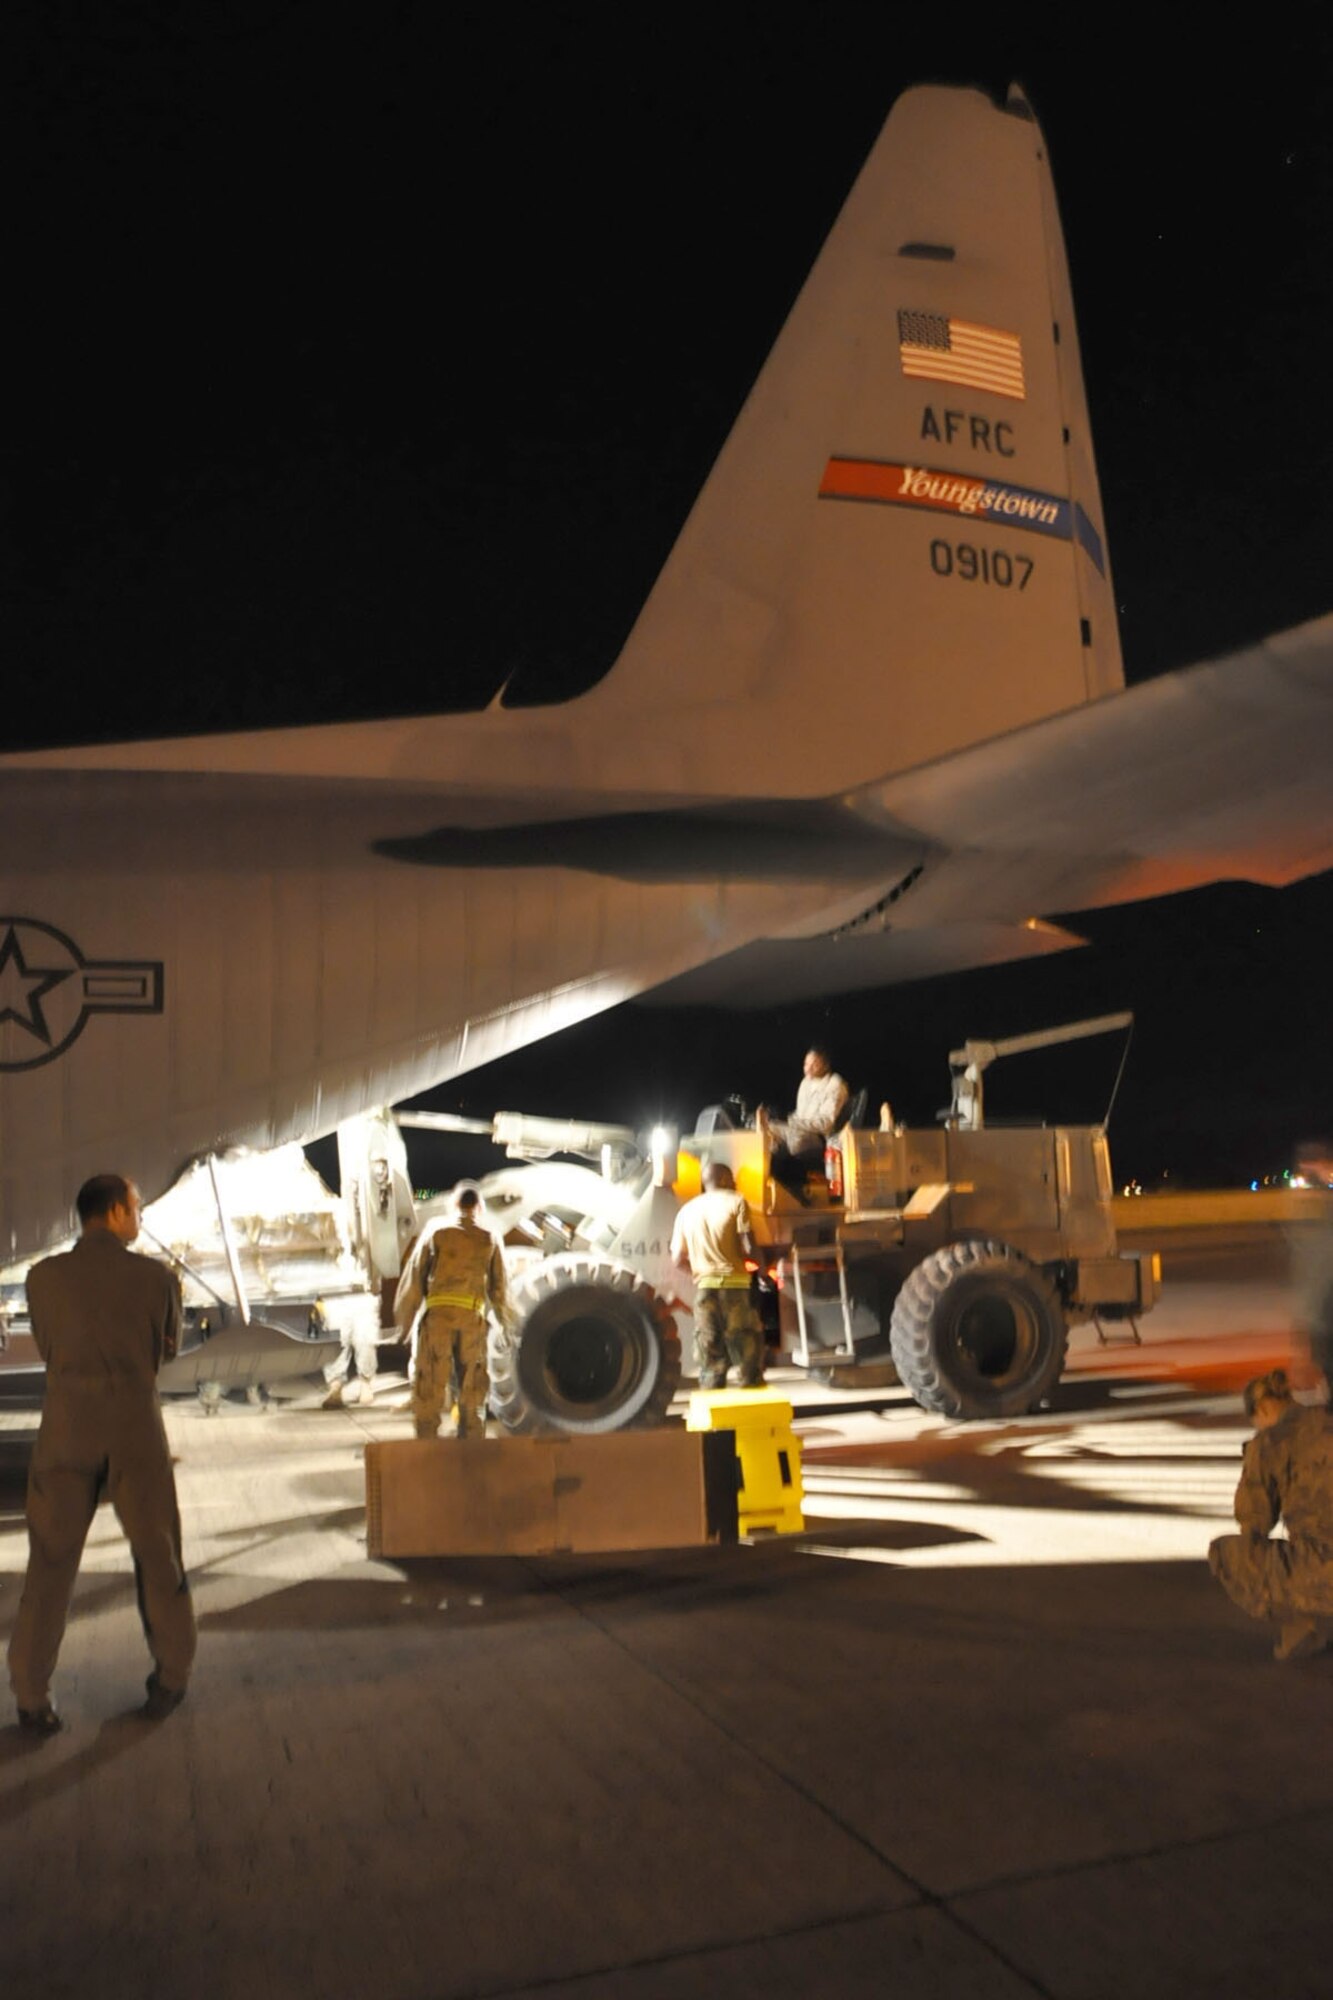 SOTO CANO AIR BASE, Honduras -- Air Force Reserve Maj. Joe George, assigned to the 910th Operations Support Squadron, observes as ground cargo handling personnel use a forklift to load a pallet load aboard a C-130H Hercules tactical cargo transport aircraft, assigned to the 910th Airlift Wing, on the cargo ramp here, January 17. Maj. George is pilot of the C-130H and commander of a 12-person crew from the 910th, based at Youngstown Air Reserve Station, Ohio, scheduled to deliver the pallet, a HUMVEE military vehicle, a trailer and supplies along with a group of U.S. Military medical personnel to Port-au-Prince International Airport, Haiti as part of the relief effort to aid the people of the stricken island nation in the aftermath of the massive earthquake that devastated Port-au-Prince and surrounding areas last week. The 910th currently has three aircraft, crews of more than 30 personnel flying relief effort missions and a myriad of Citizen Airmen working at YARS to provide home station support to the crews. The 910th Airlift Wing stands ready to provide airlift capabilities to the massive humanitarian effort as long as needed by mission requirements. 